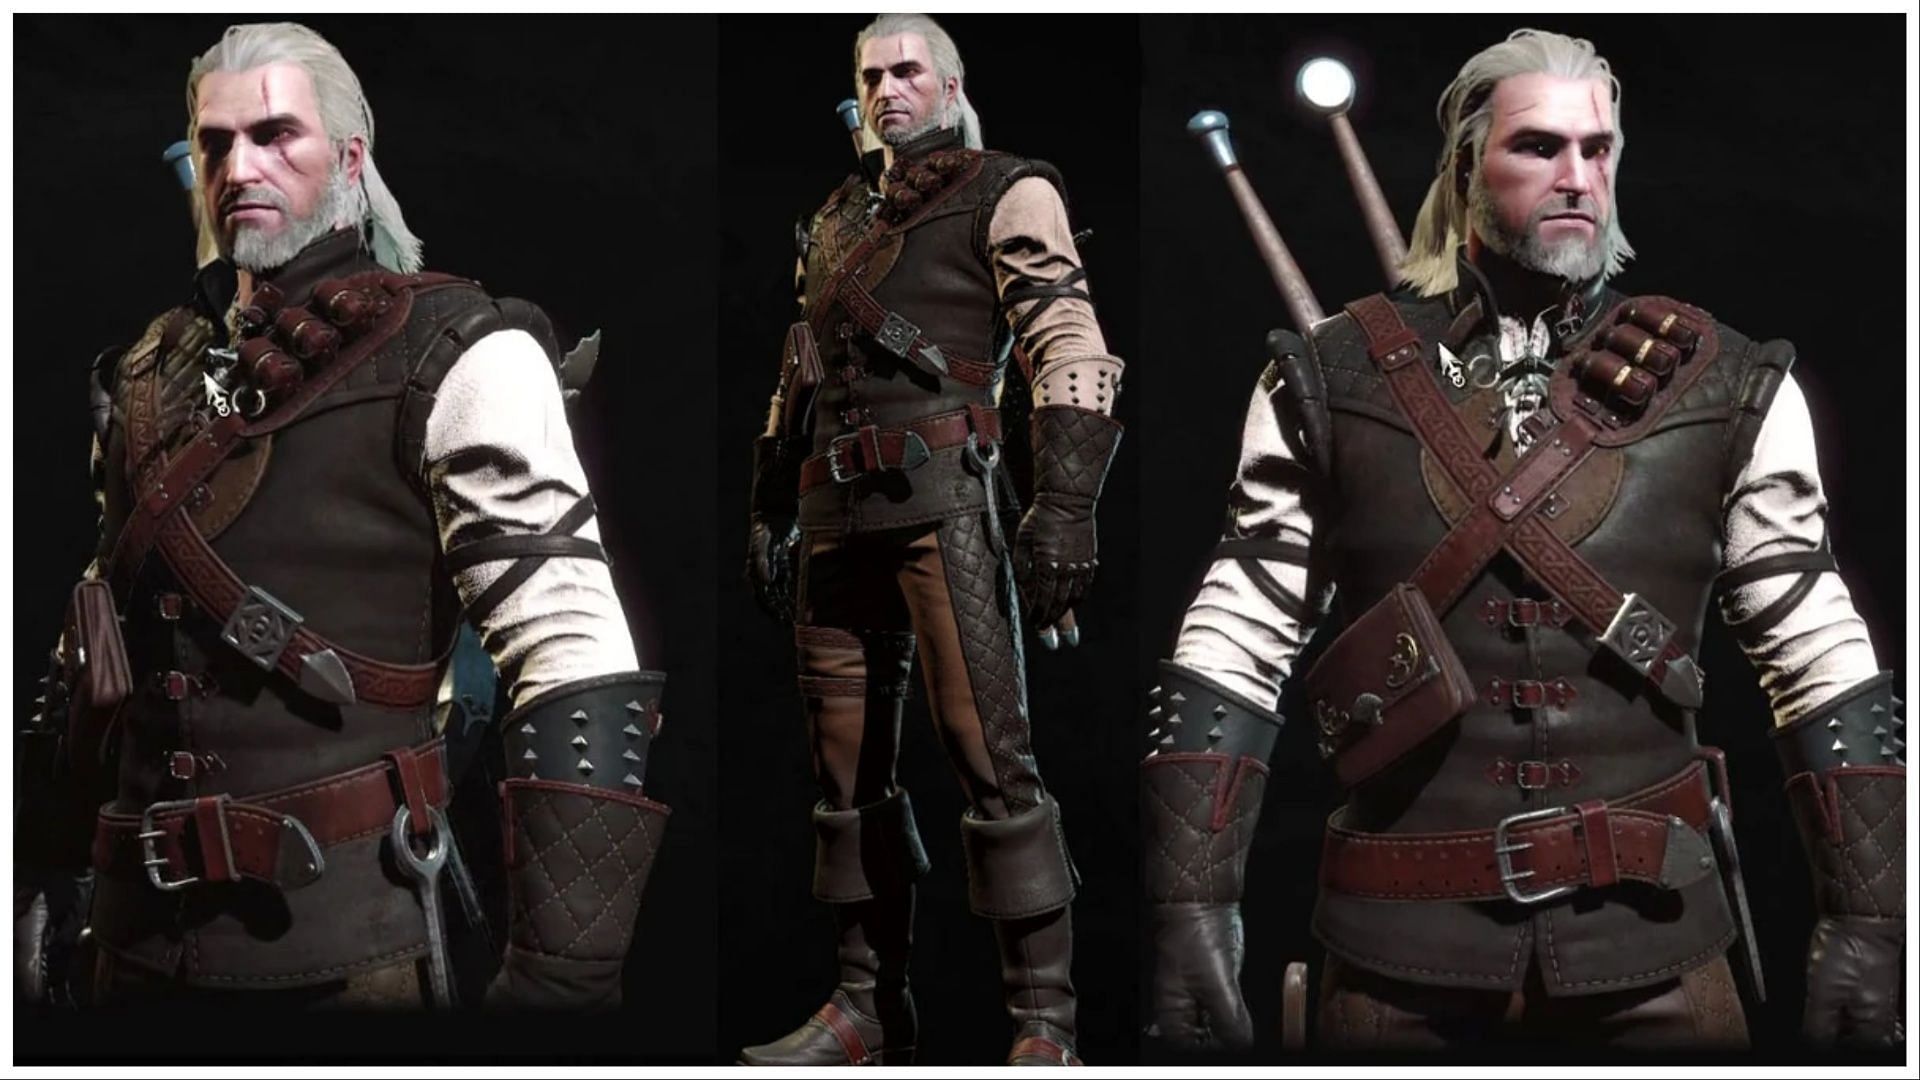 Manticore Armor Set in The Witcher 3 (Image via CD Projekt Red)